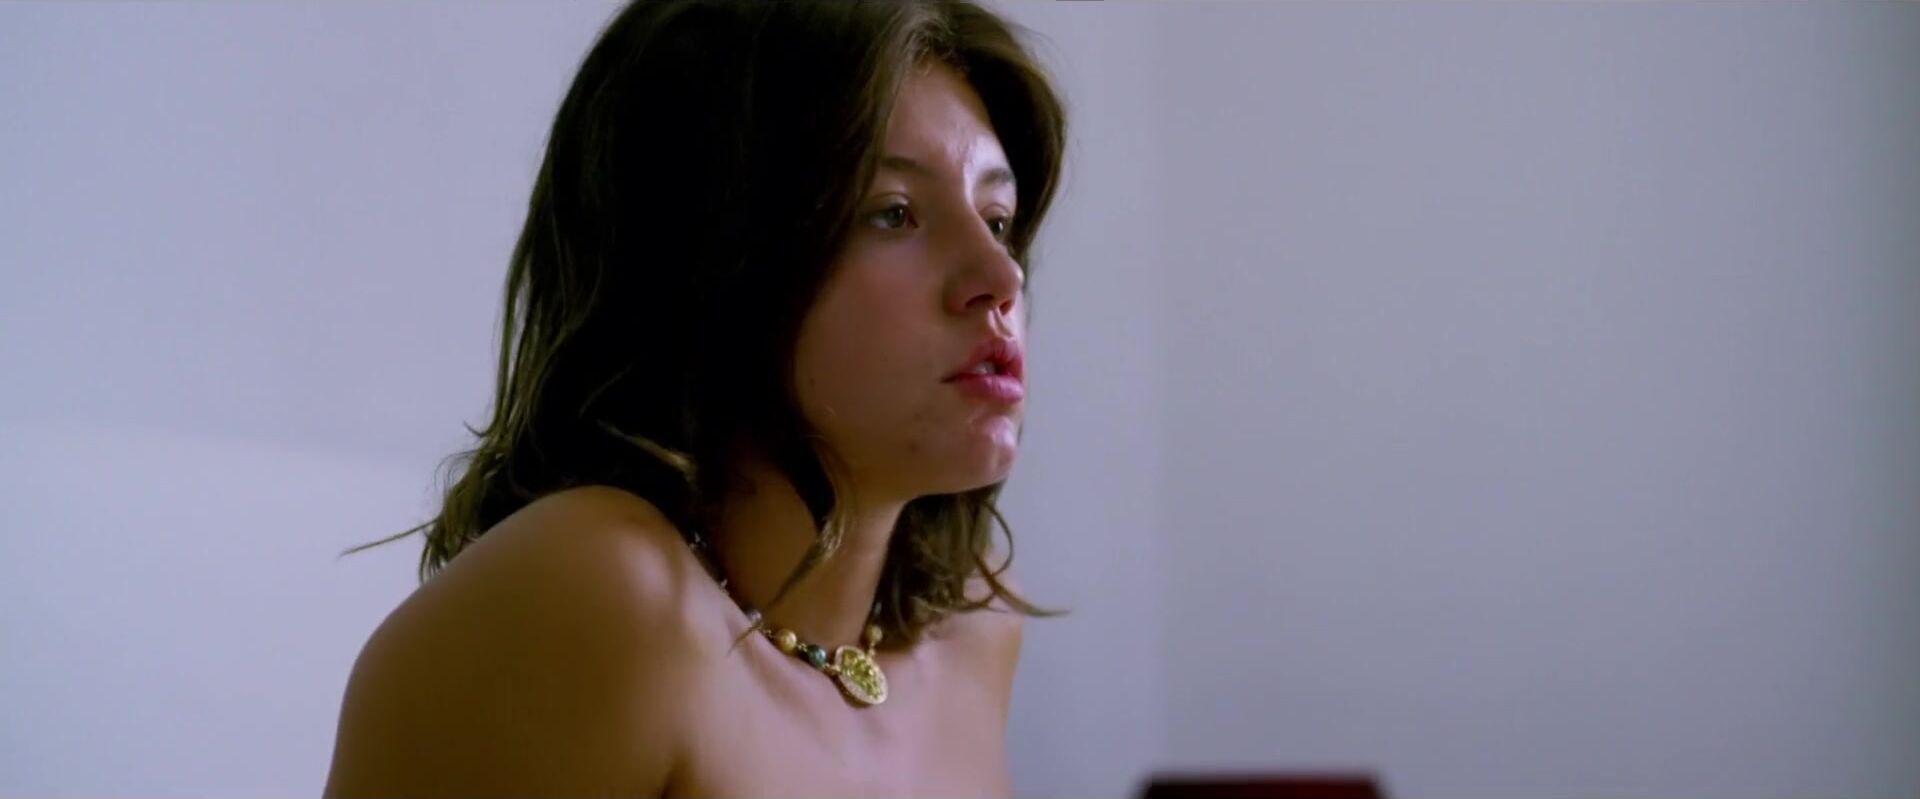 Mamadas Adele Exarchopoulos and other French girls naked fool around in Orpheline (2016) Safari - 1